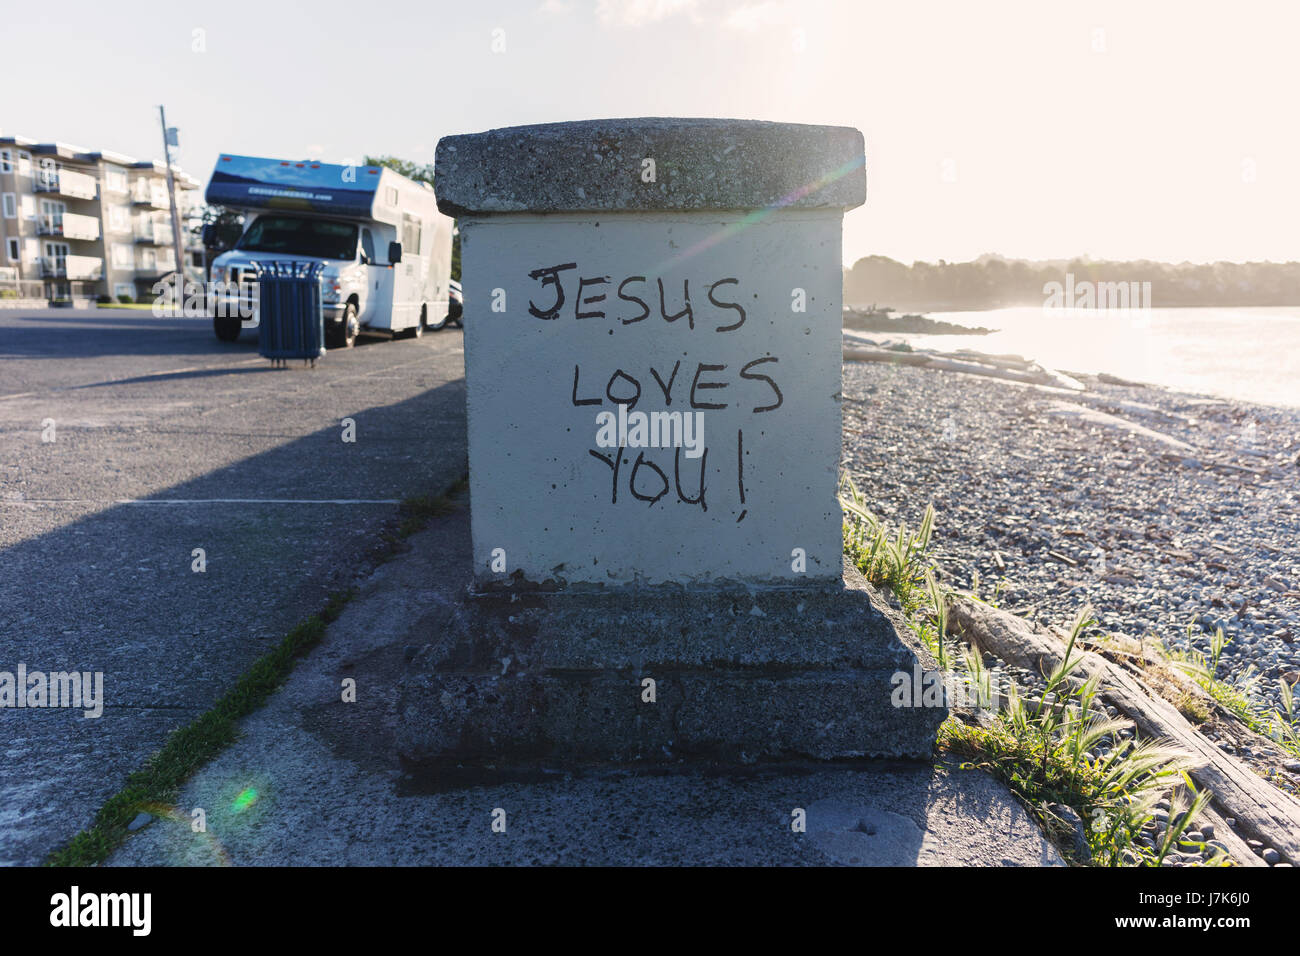 Jesus Loves You graffiti by the ocean.  Victoria, BC Canada Stock Photo